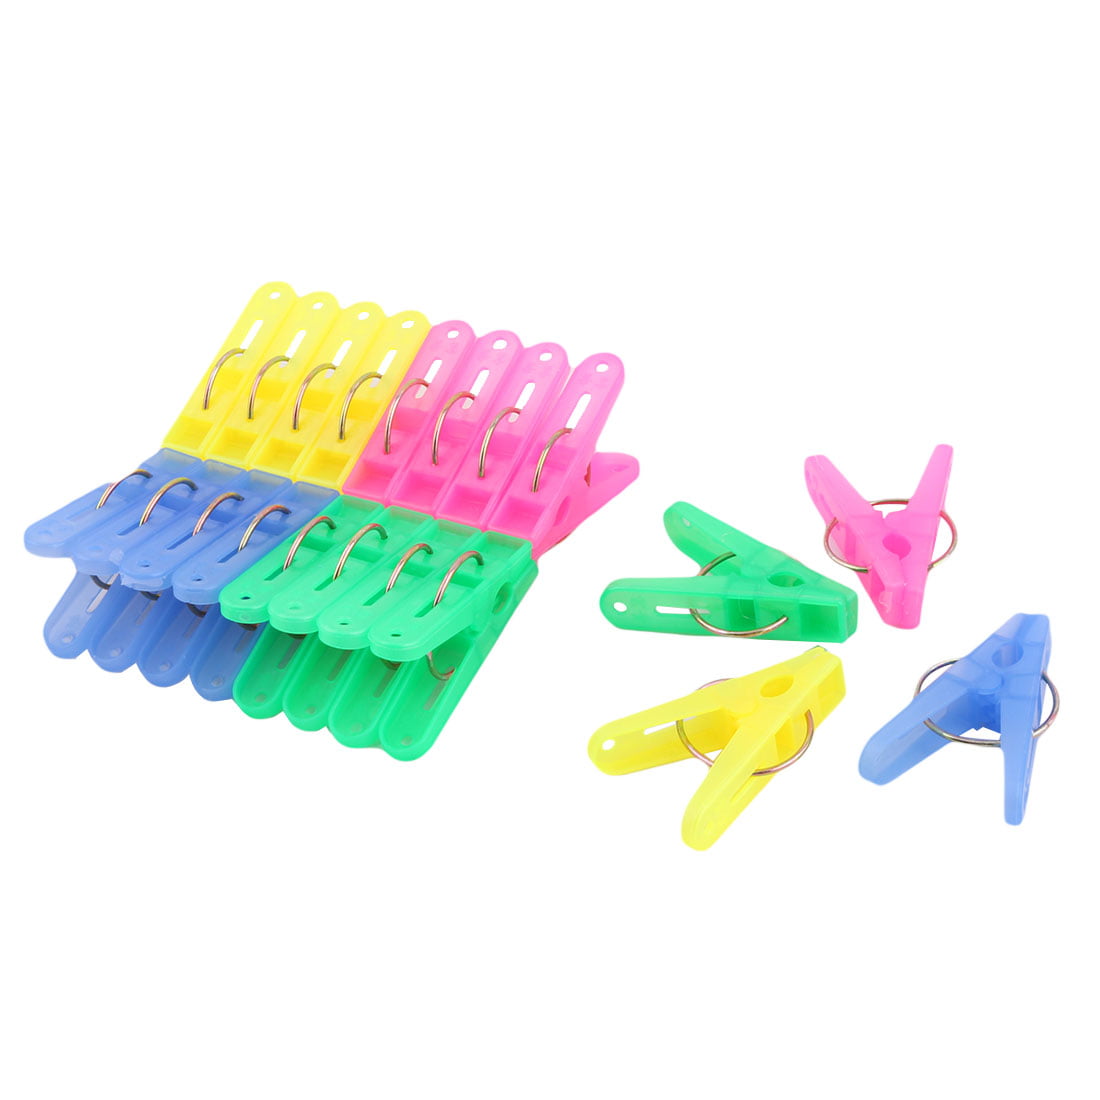 24PCS Plastic Clothes Clips Drying Socks Towel Rack Clamps Holder 